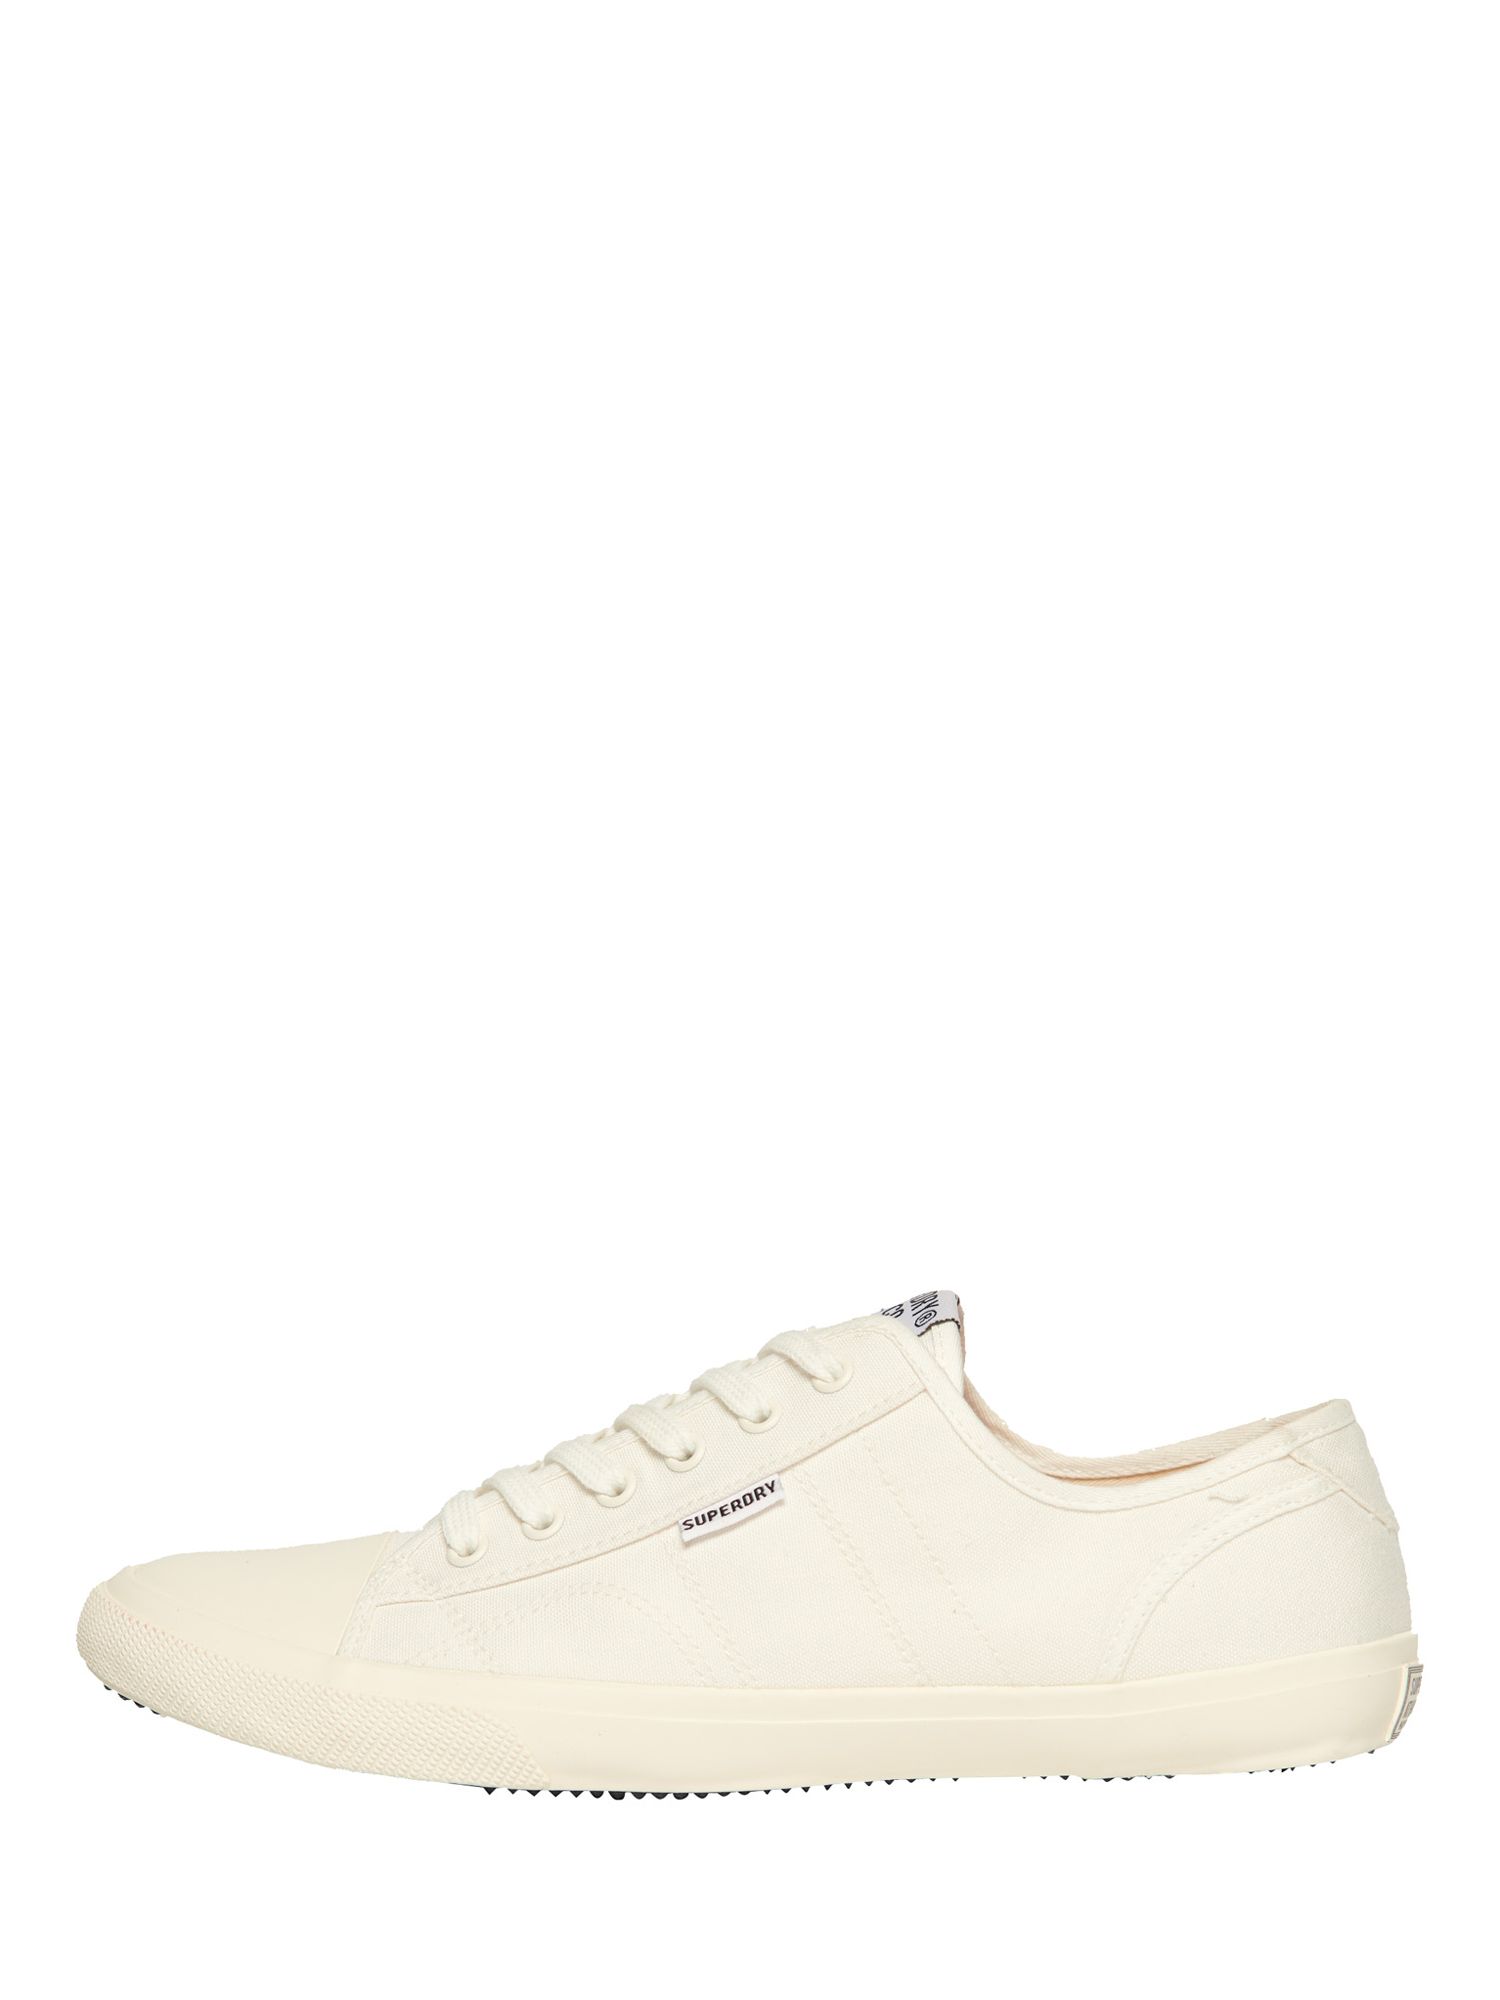 Superdry Vegan Low Pro Classic Sneakers, White